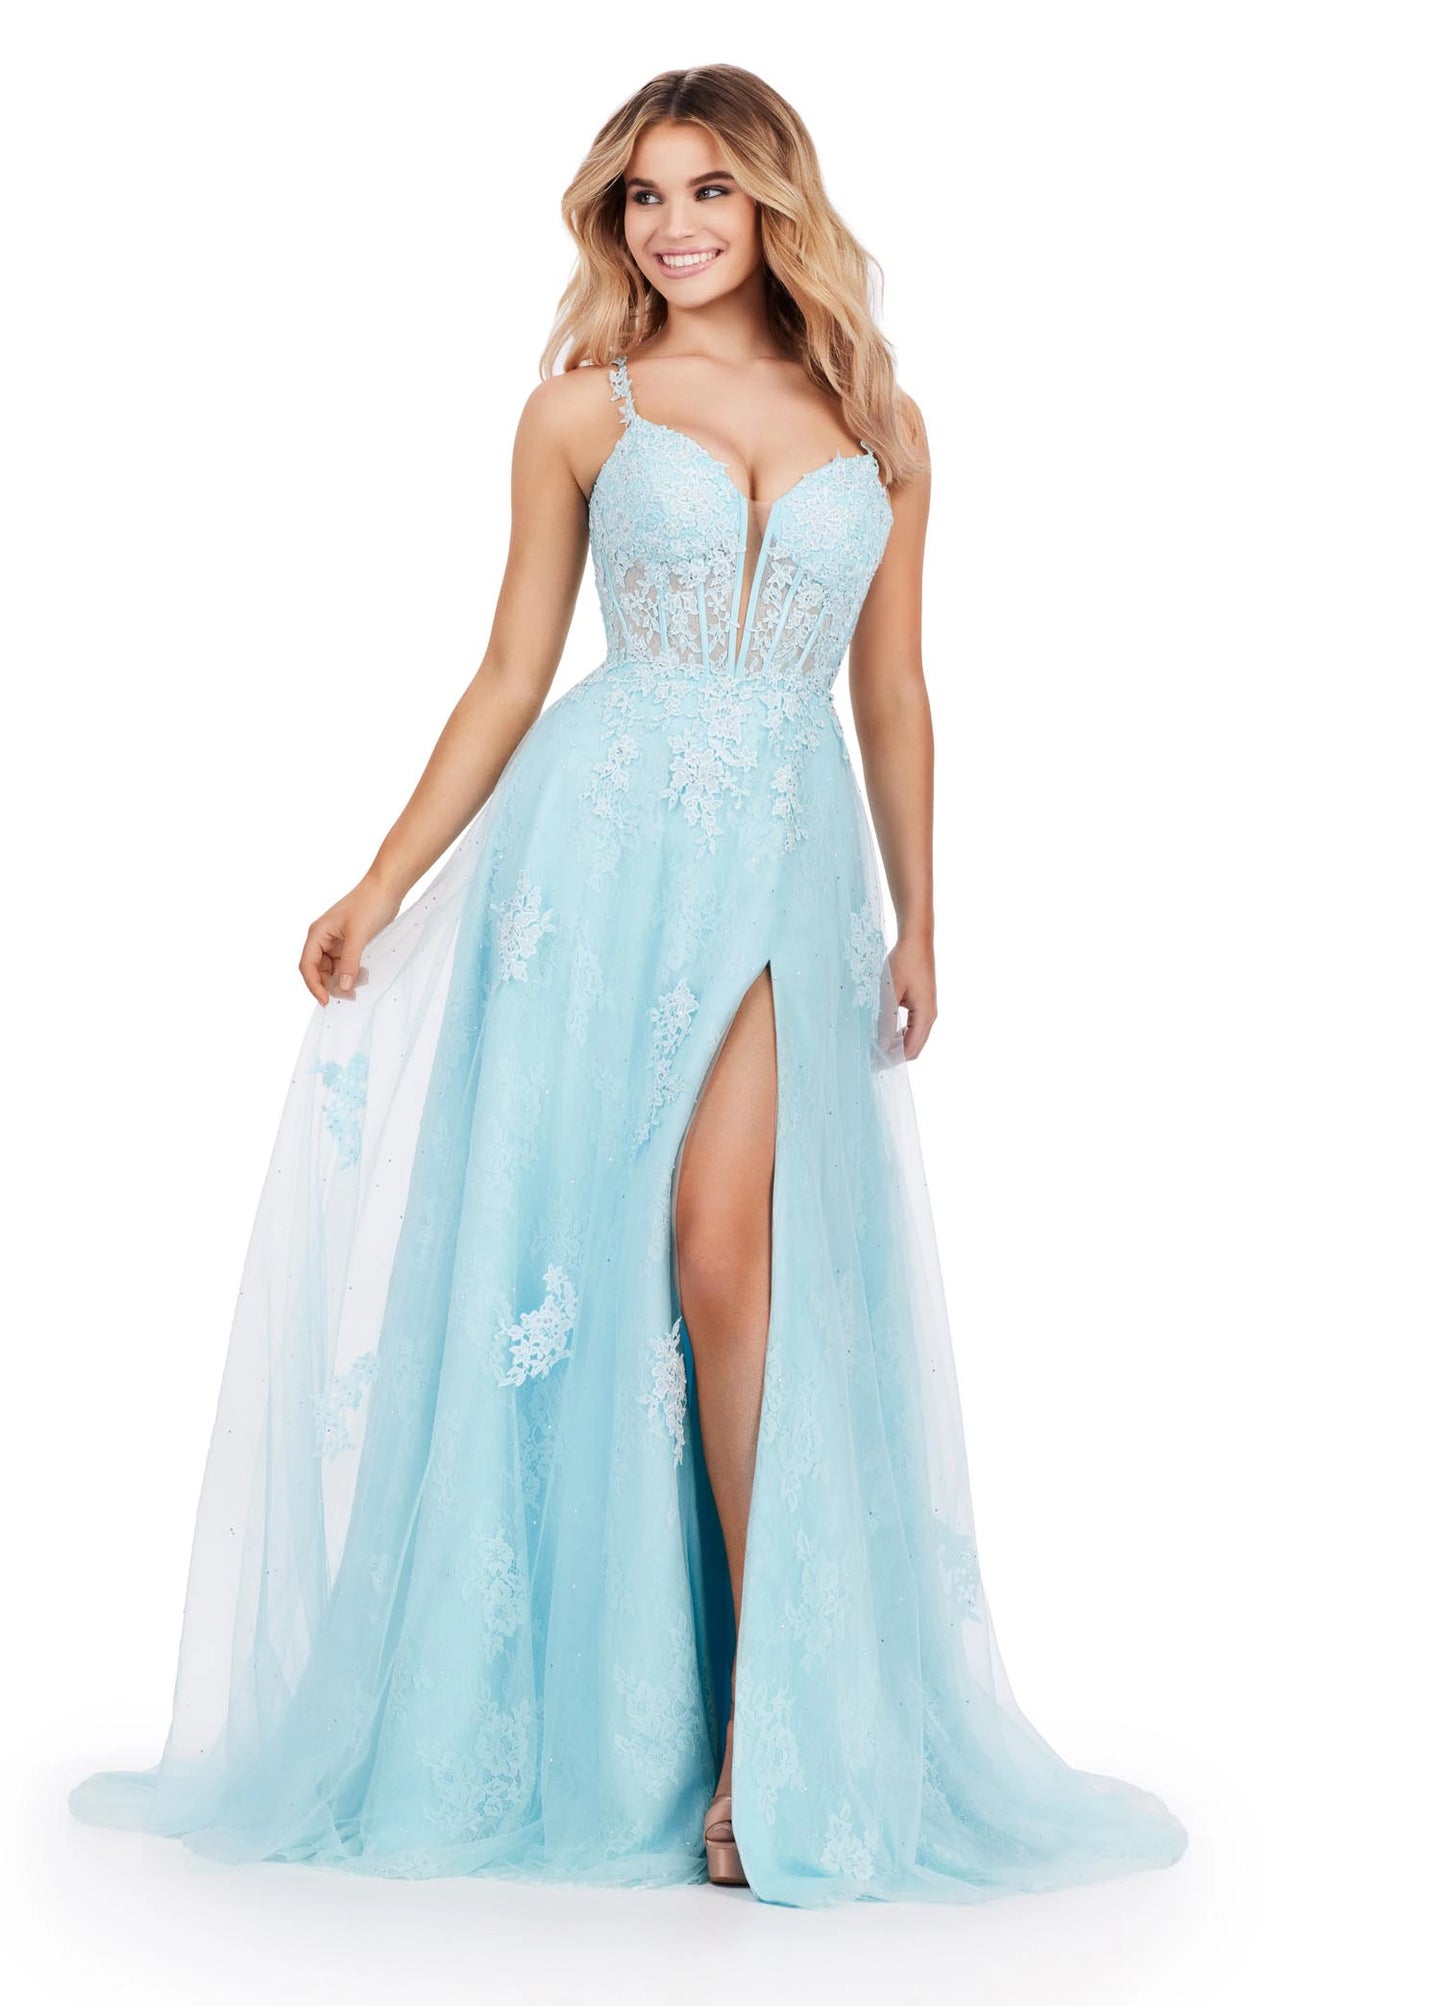 The Ashley Lauren 11558 Dress offers the perfect look for any special occasion. Crafted from a luxurious lace sheer fabric, this prom dress features a corset bodice, maxi slit A-line skirt, and pageant train - all in one stunning formal gown. Delight in the timeless style of this timeless piece. 